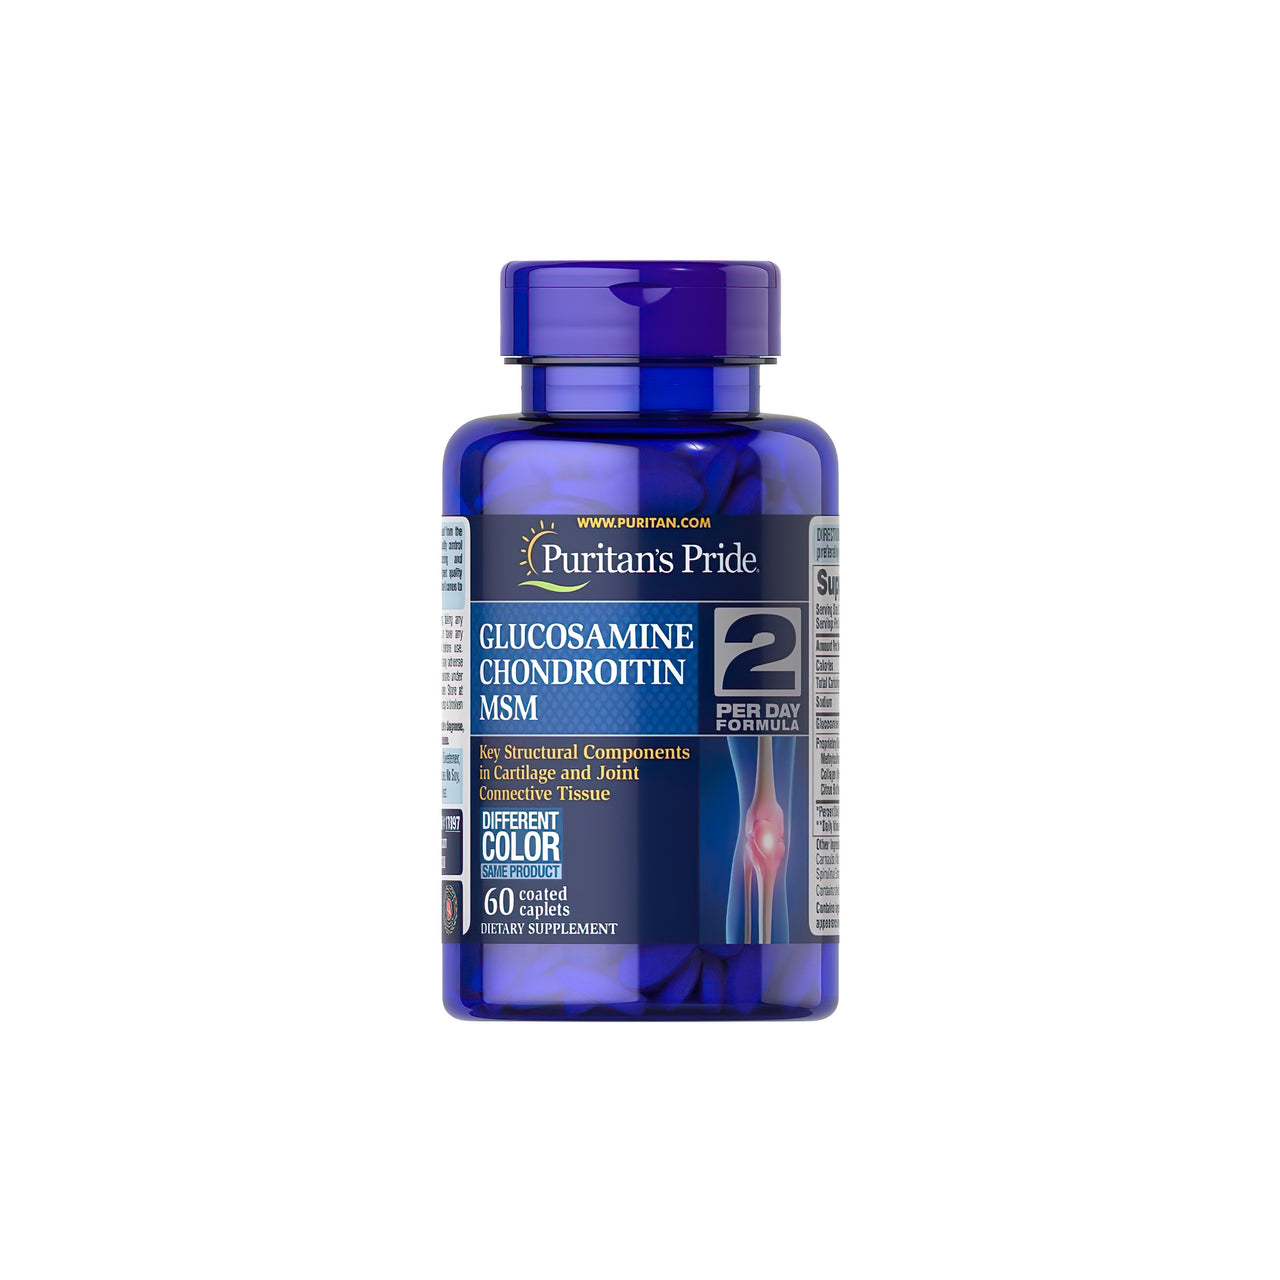 A bottle of Triple Strength Glucosamine, Chondroitin & MSM 60 coated caplets by Puritan's Pride.